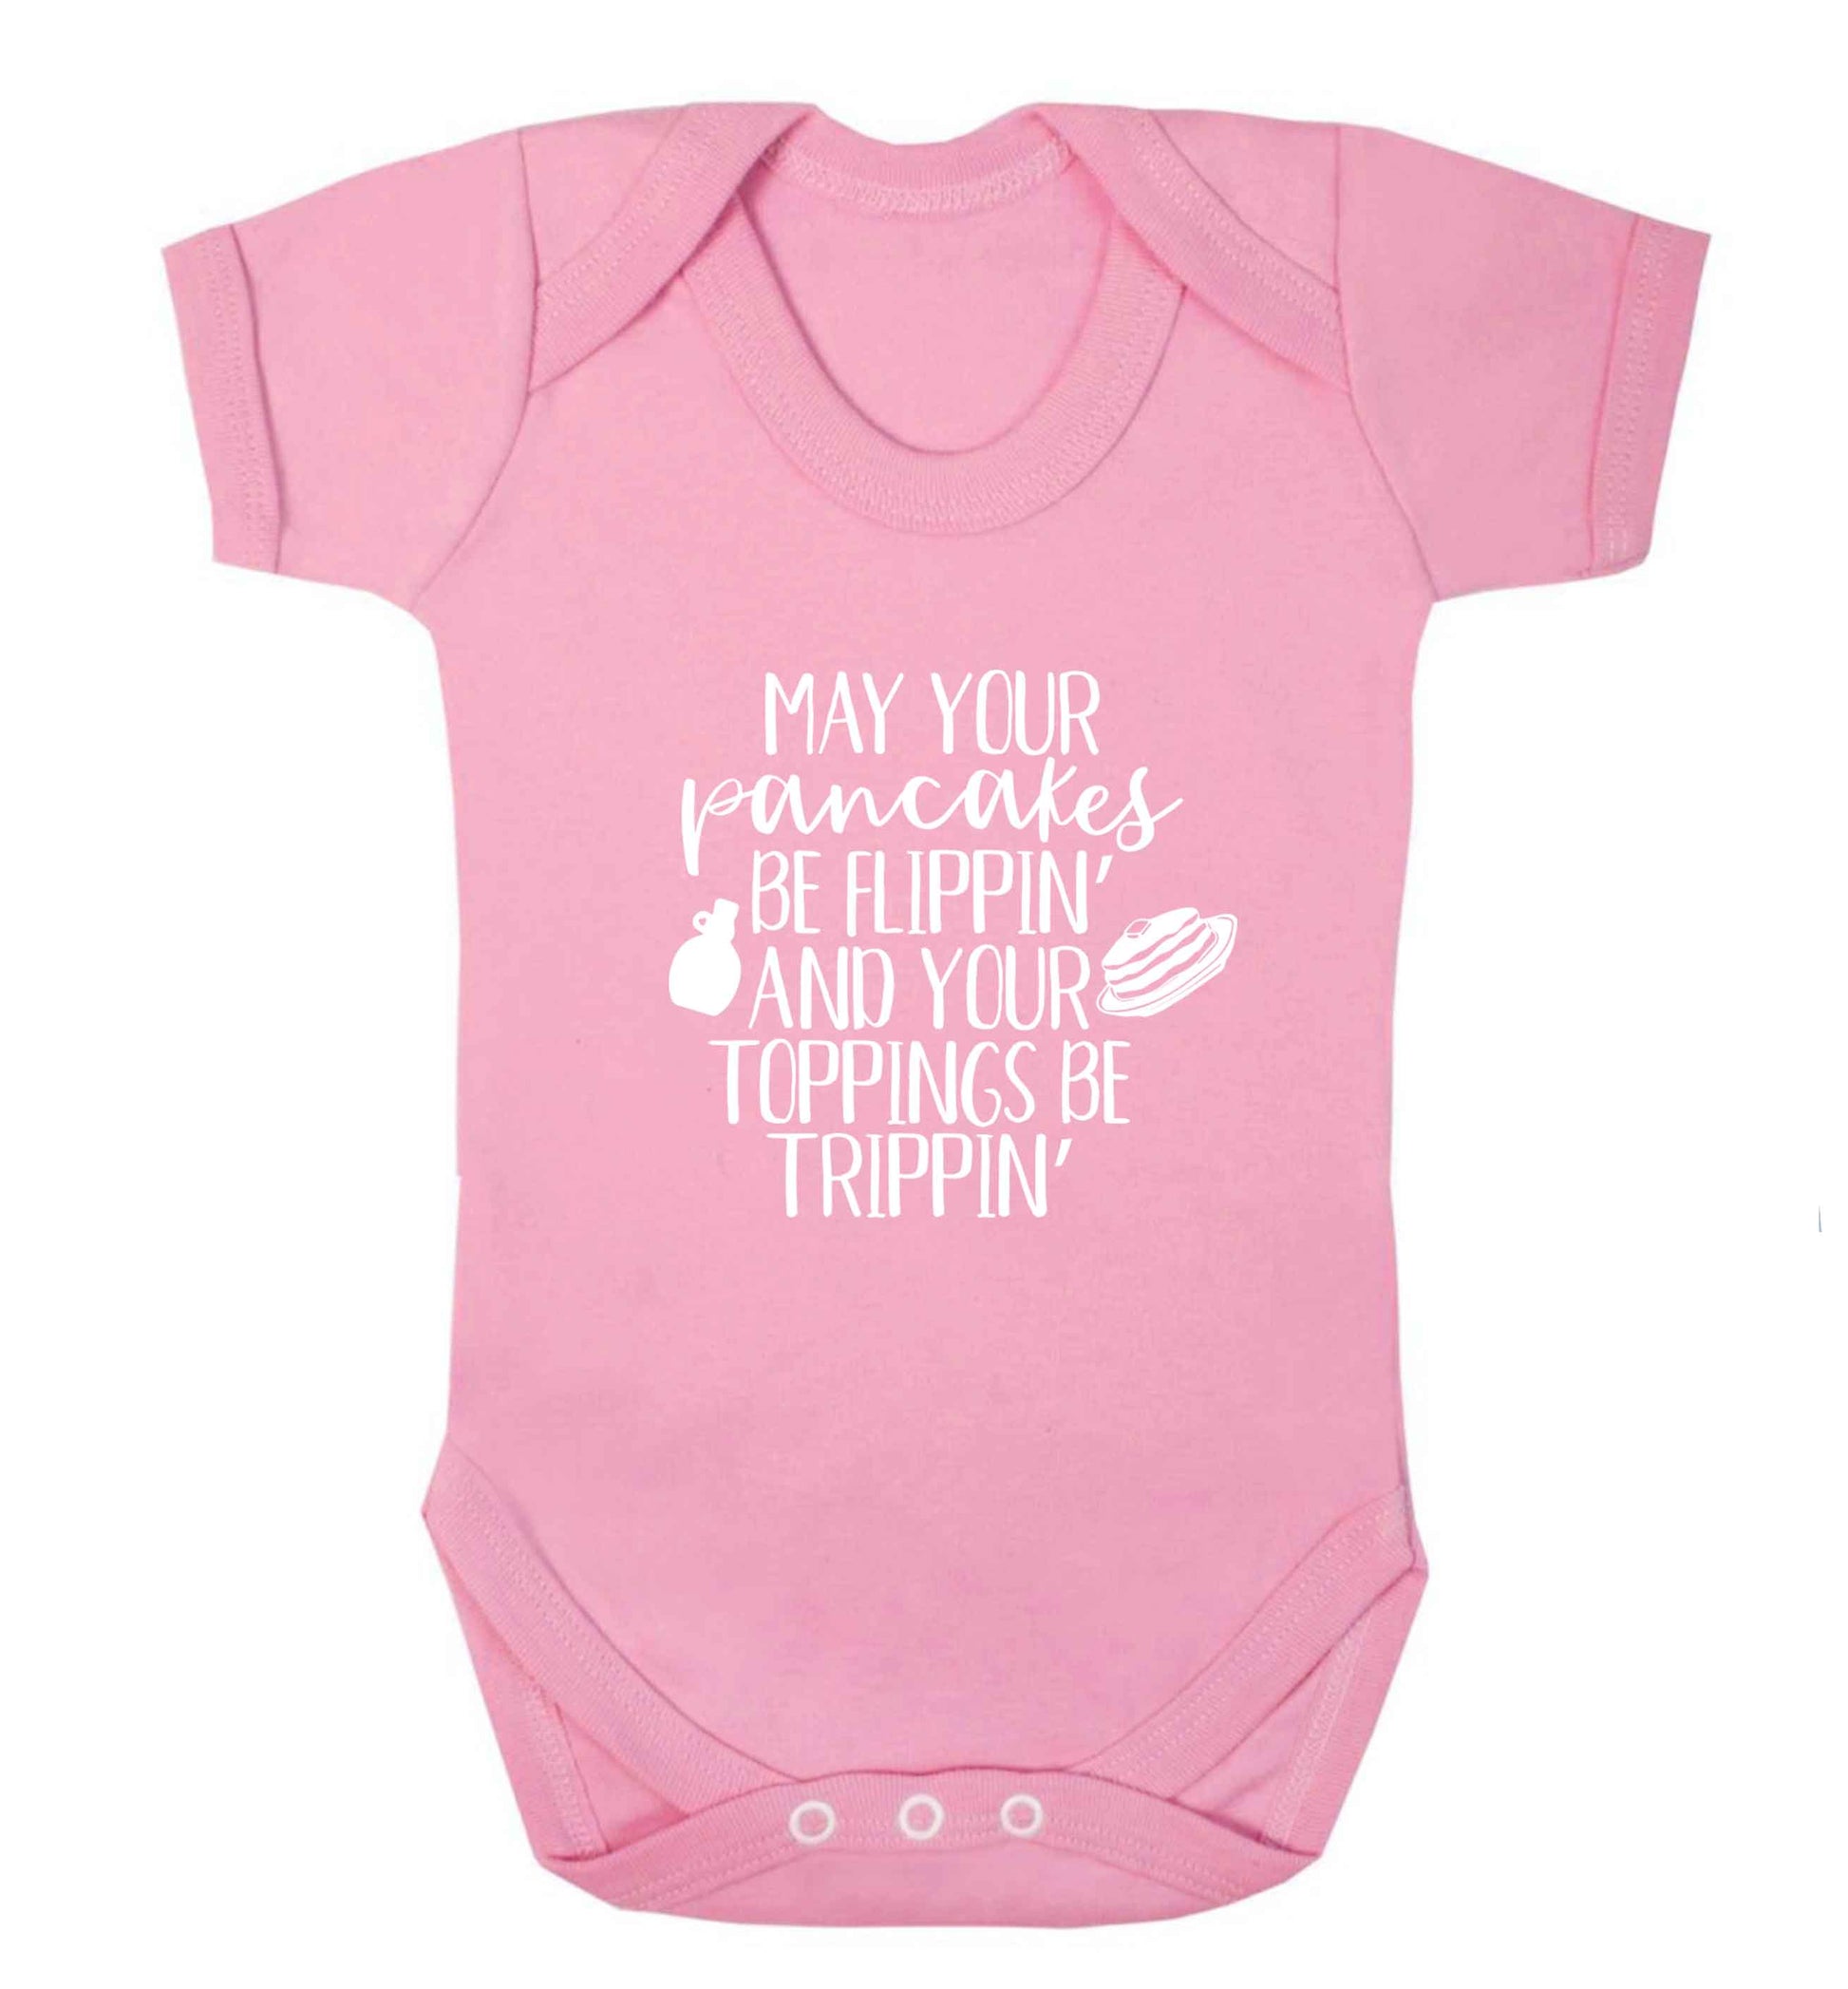 May your pancakes be flippin' and your toppings be trippin' baby vest pale pink 18-24 months